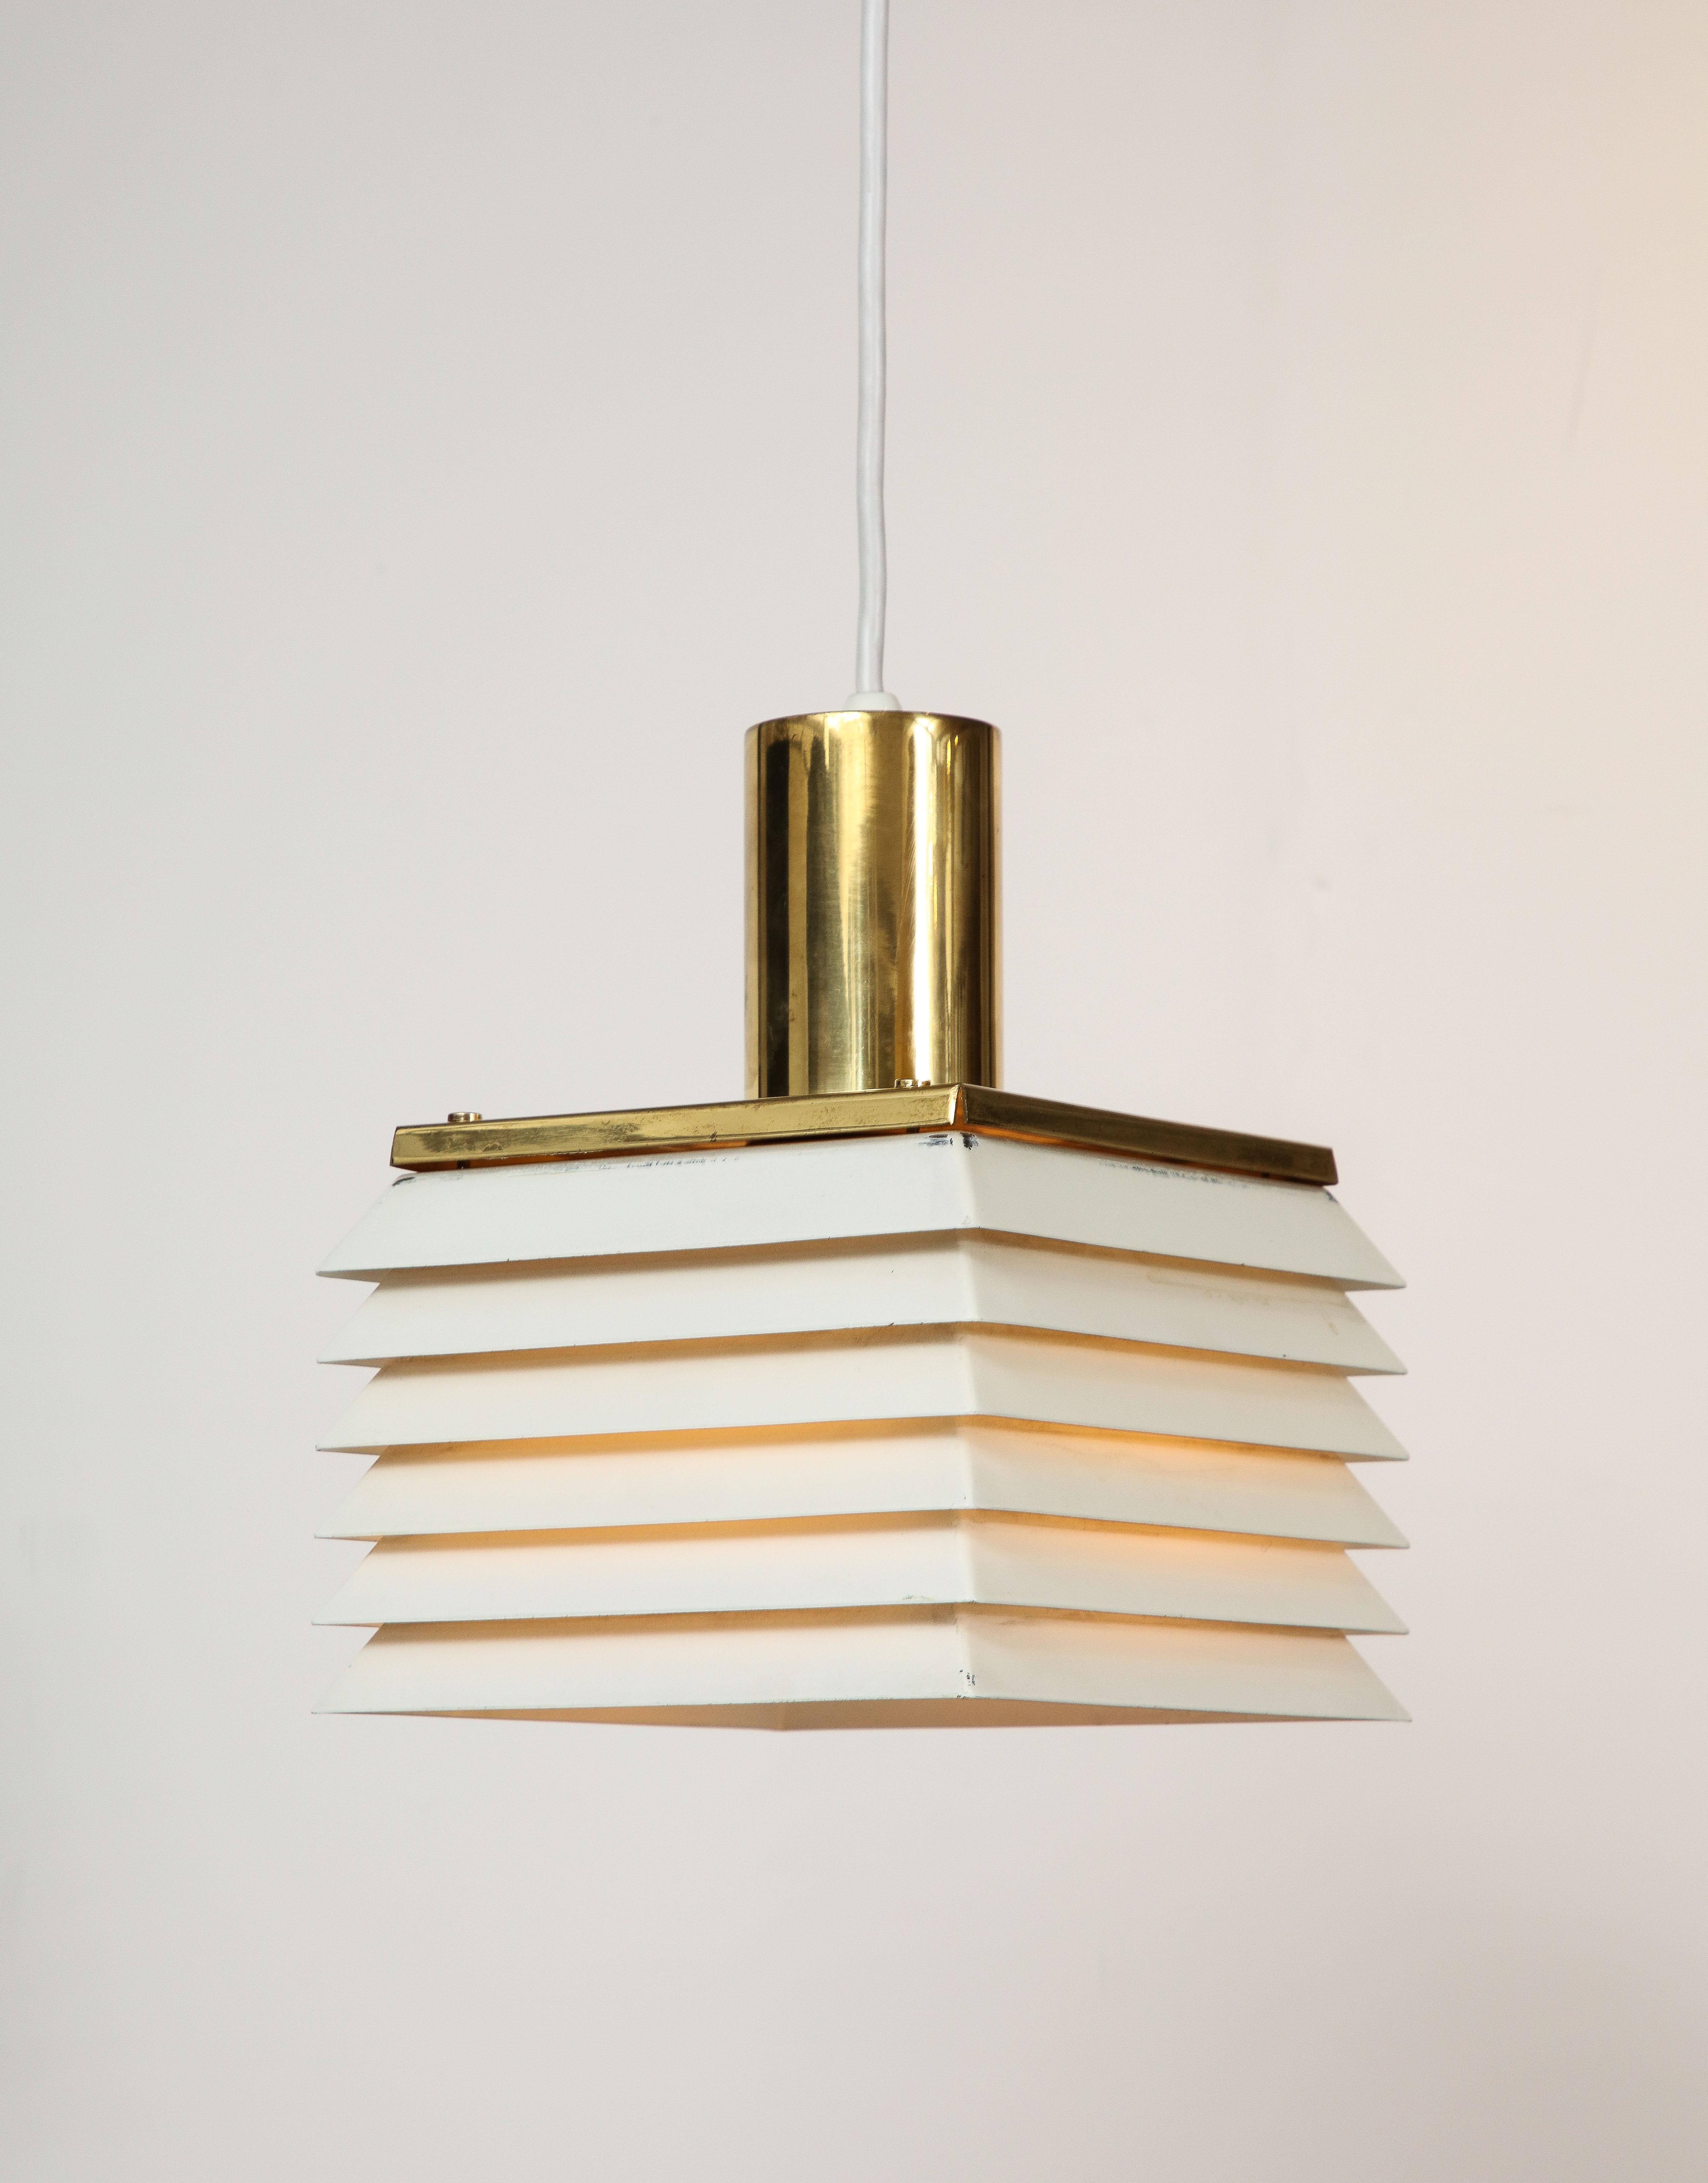 Scarce edition modern light from Hans-Agne Jakobson. Newly wired.